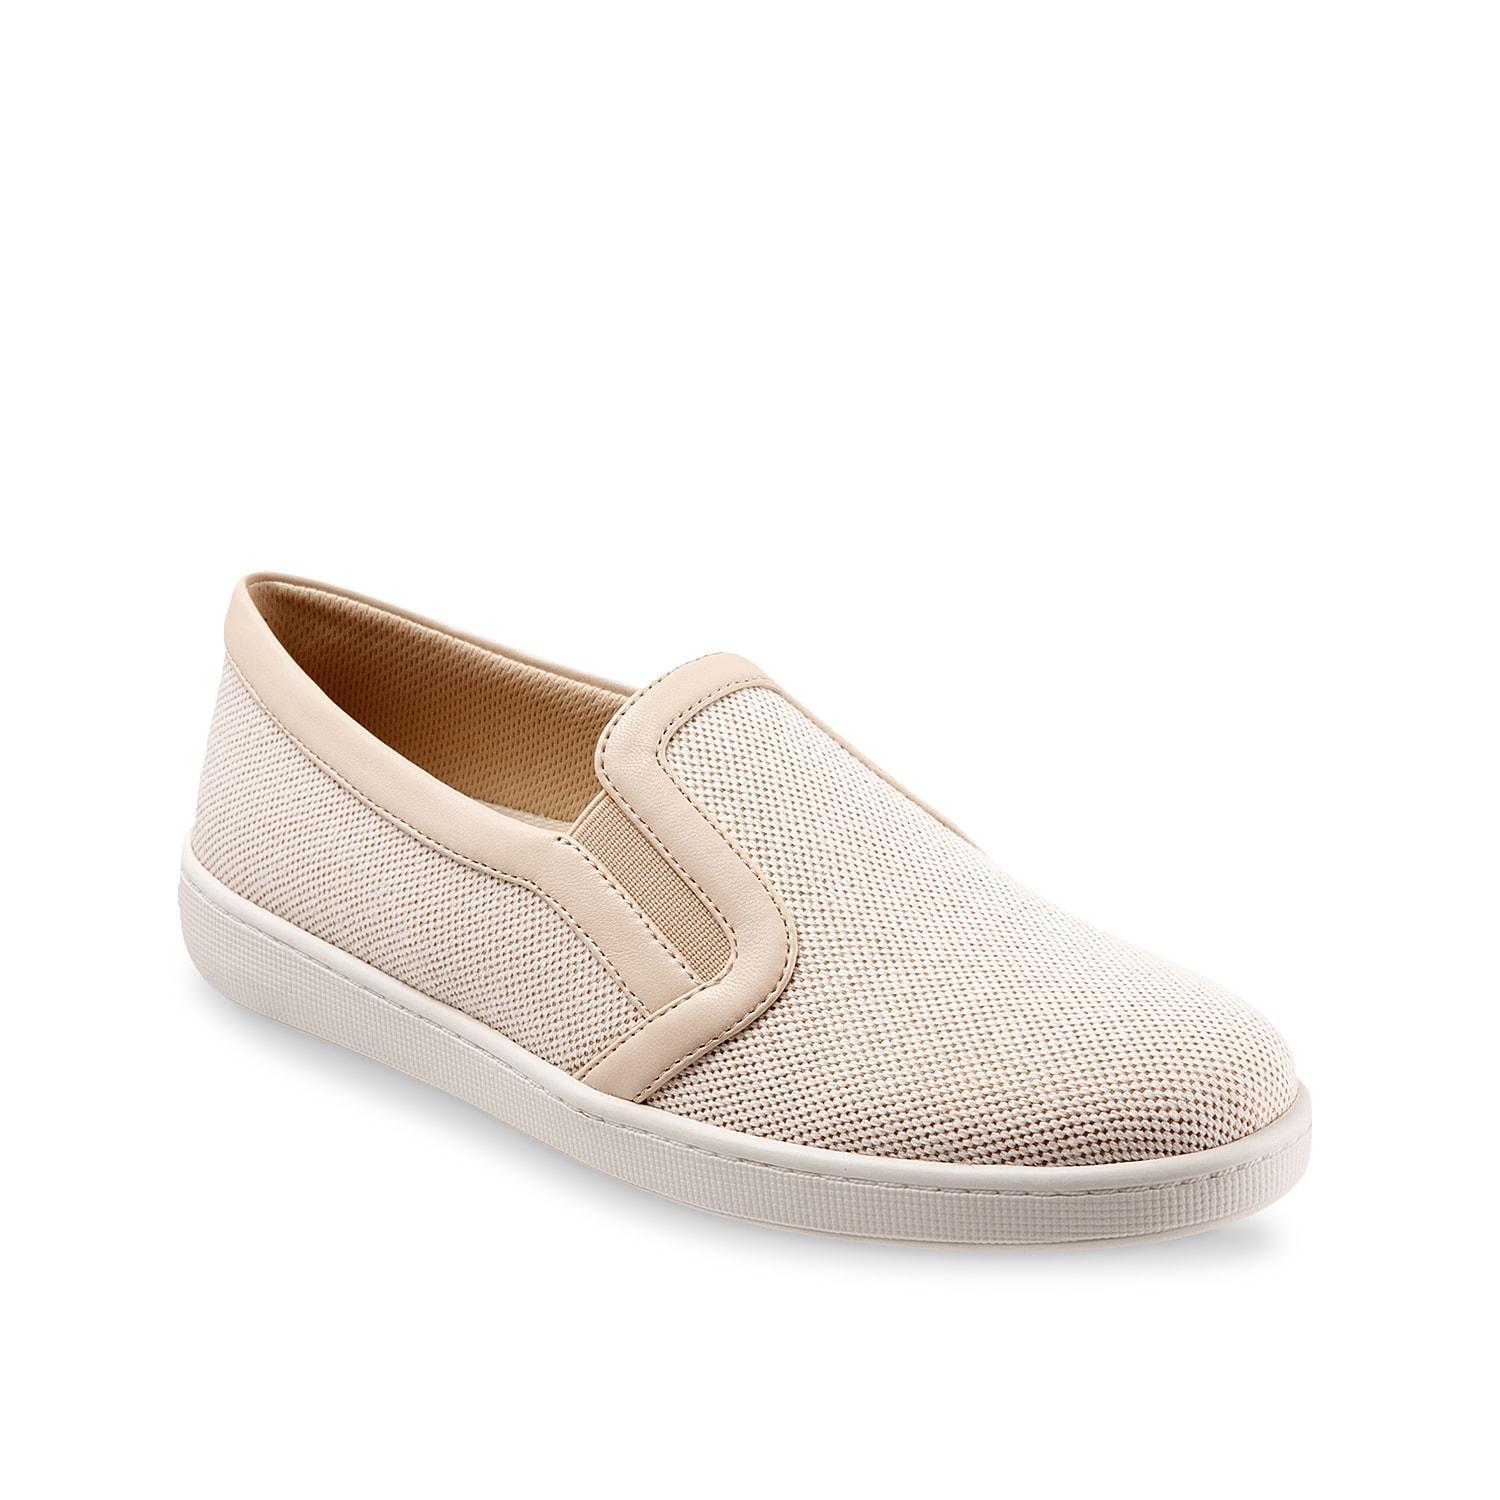 Trotters Alright Slip-On Sneaker Product Image